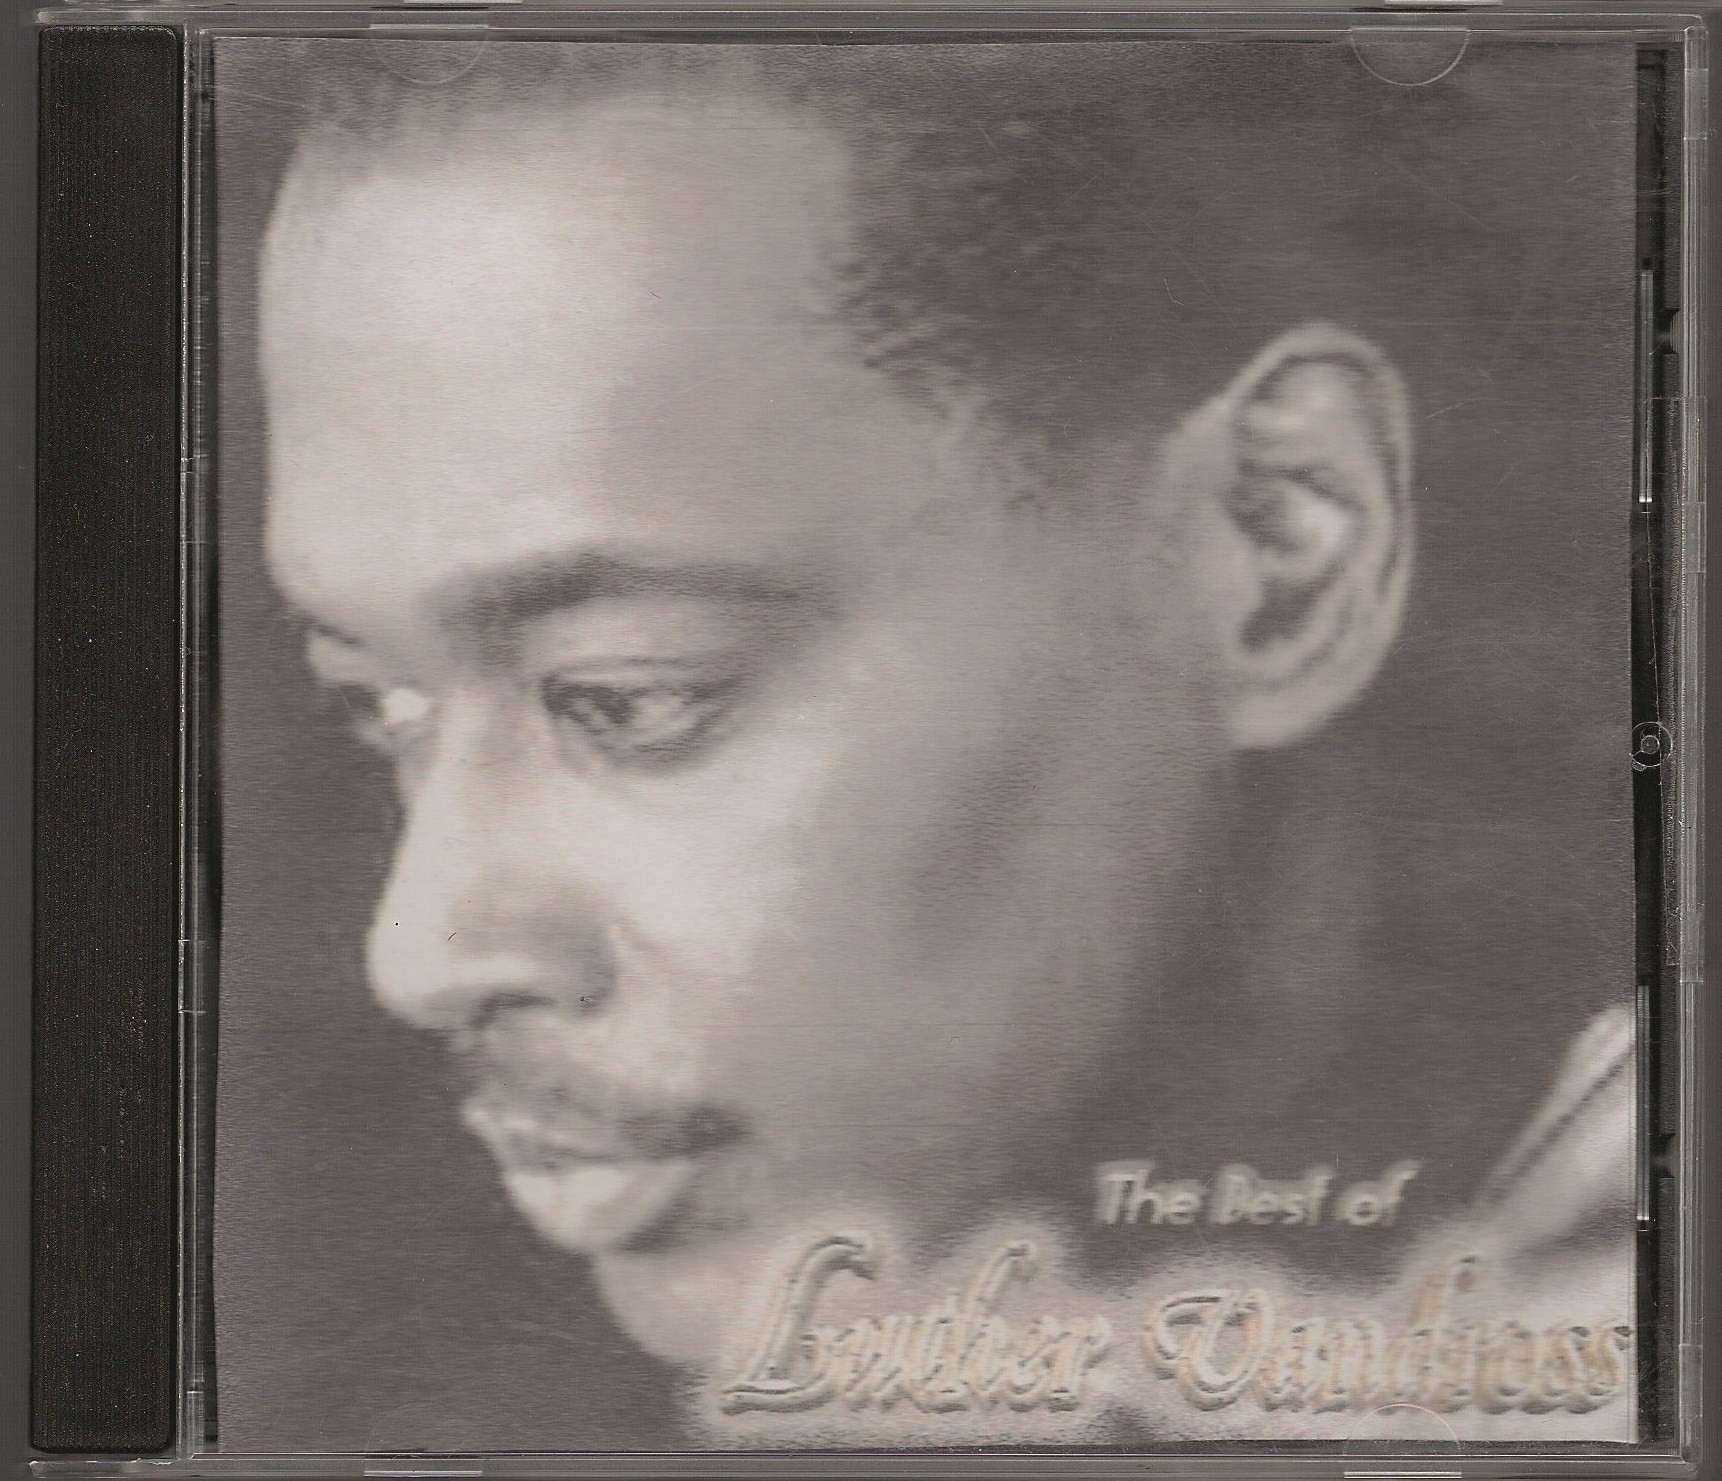 DJ APOLLO - THE BEST OF LUTHER VANDROSS